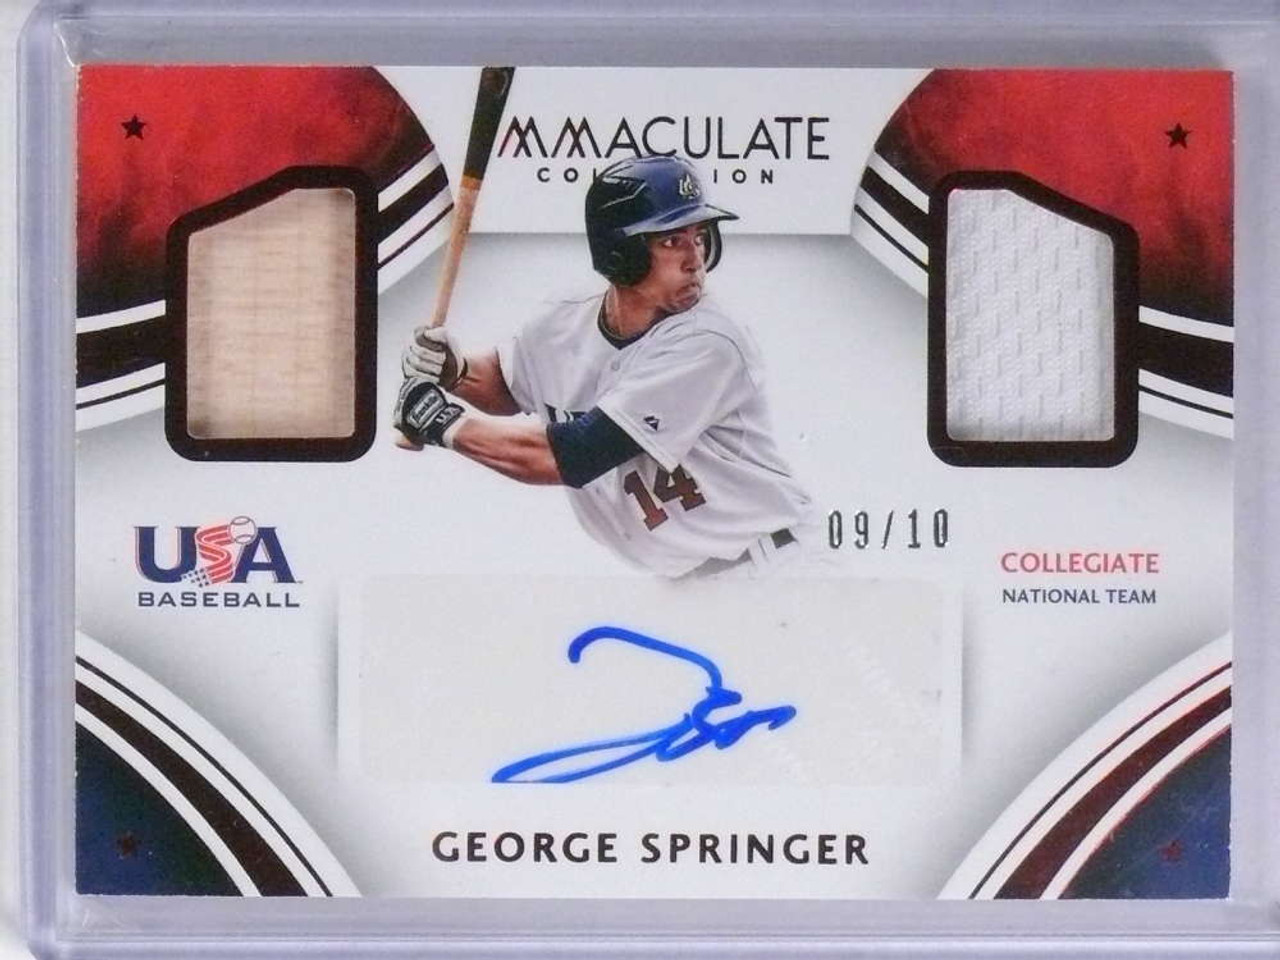 2016 Panini Immaculate USA George Springer autograph jersey bat #D09/10  *72011 - Sportsnut Cards